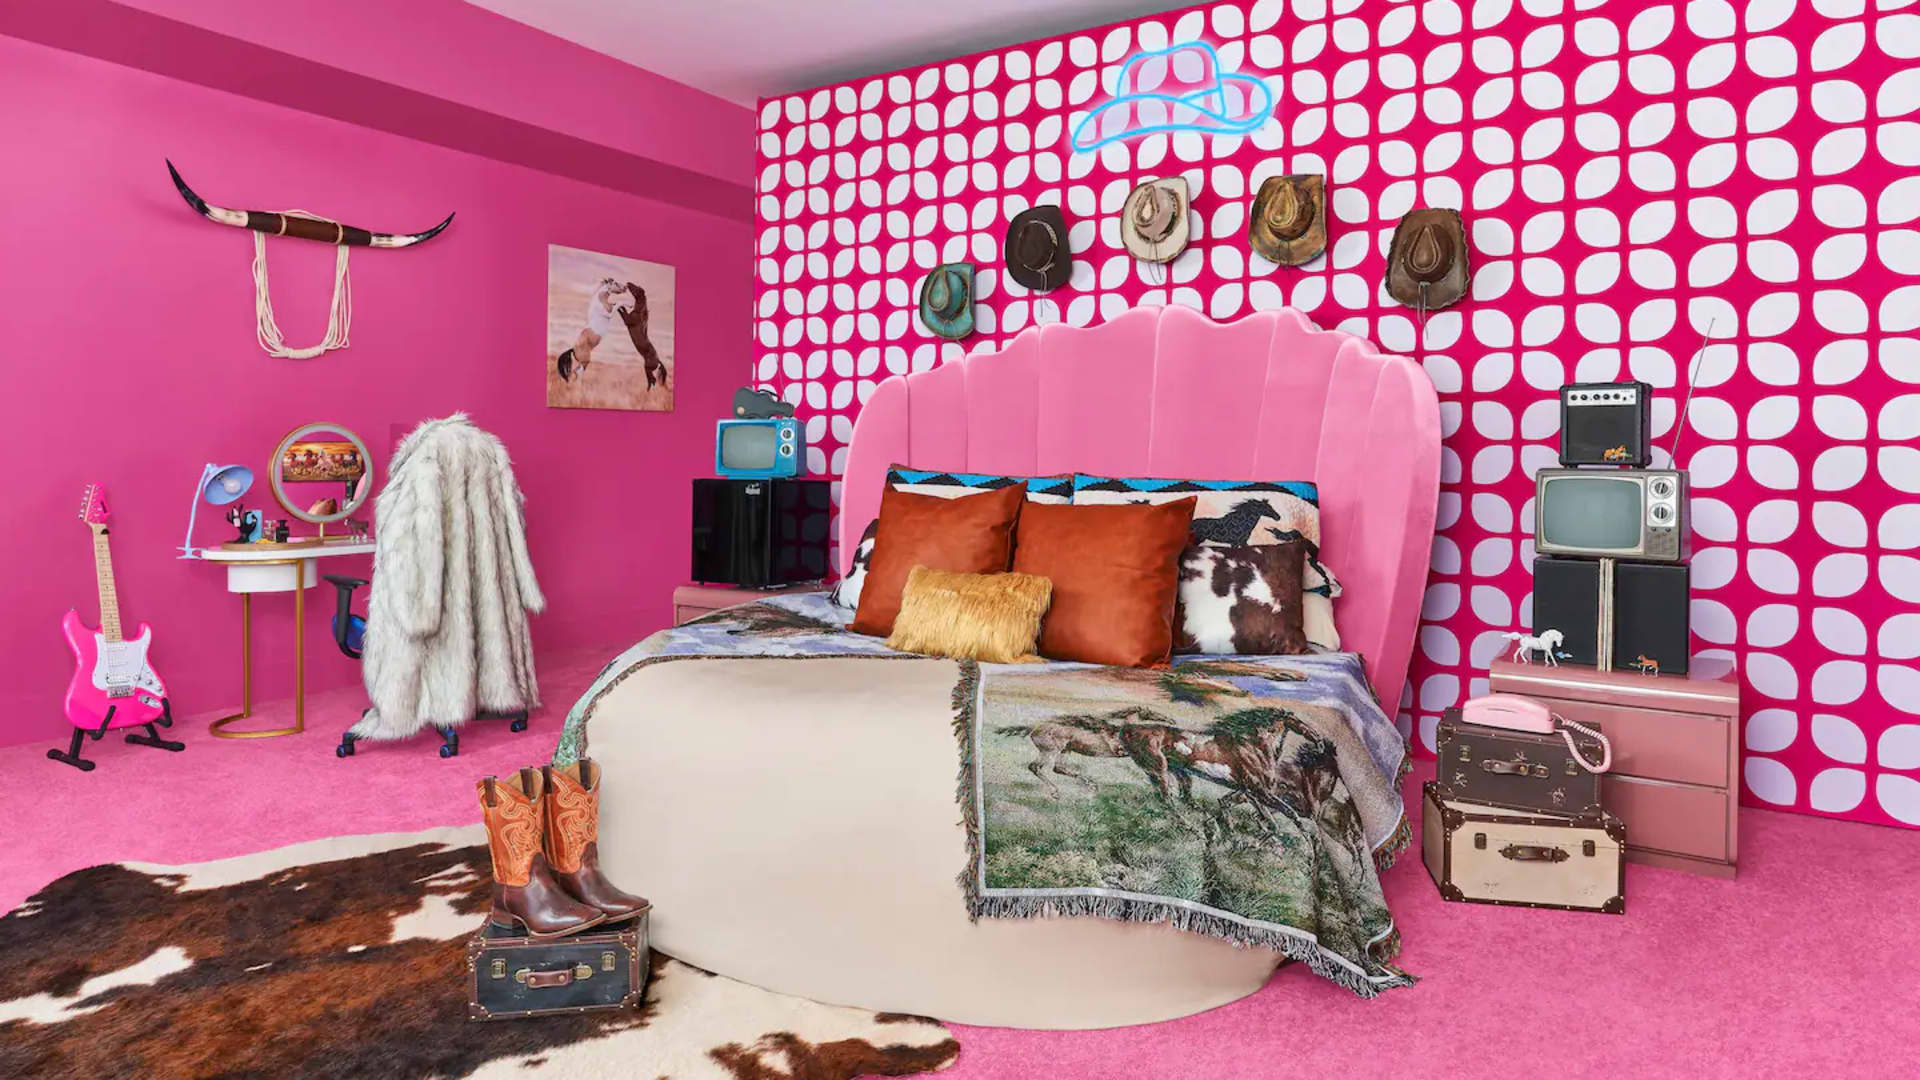 Airbnb is offering a free one-night stay in Barbie's Malibu DreamHouse.